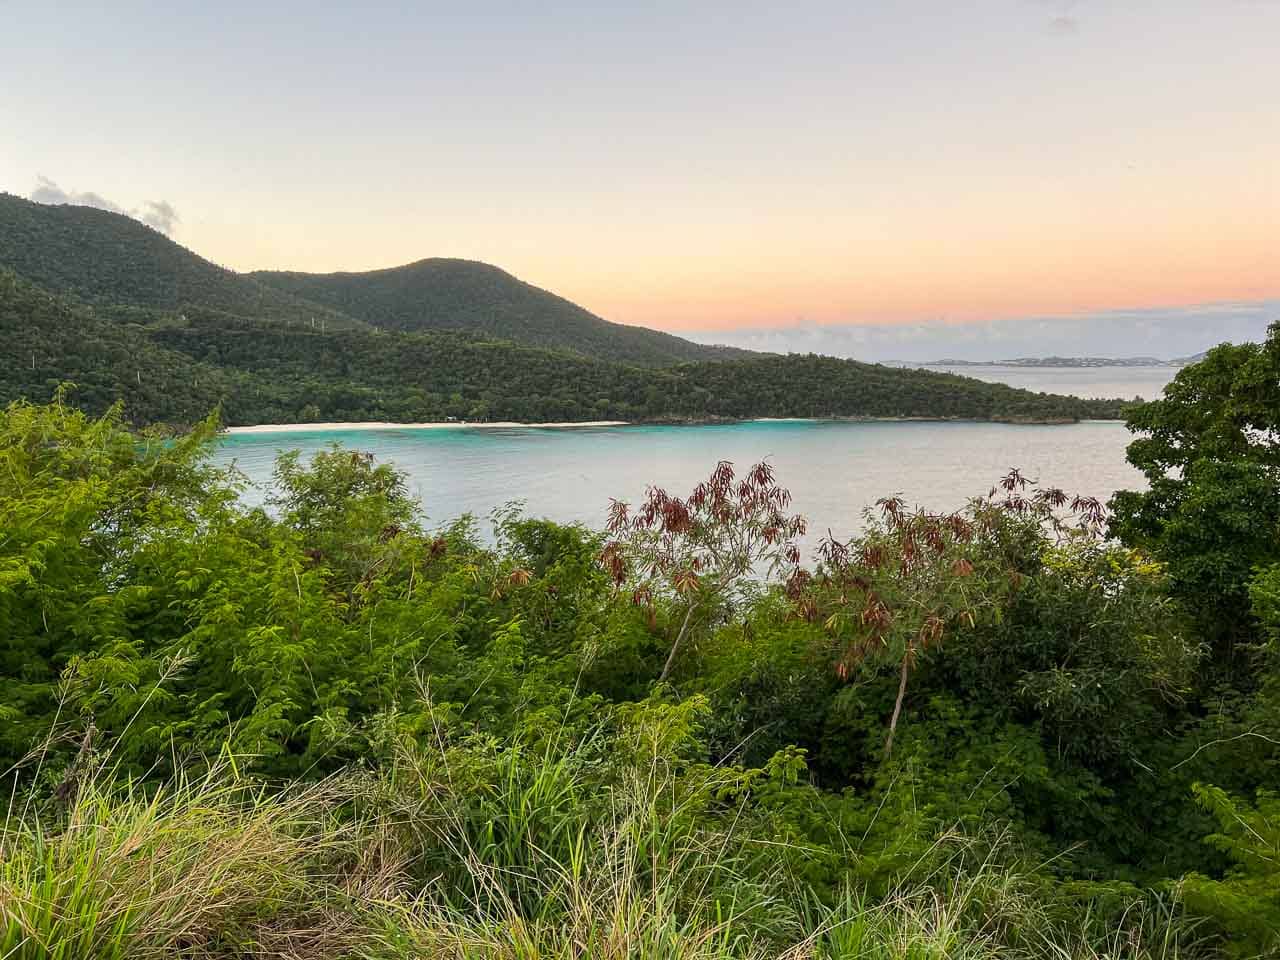 Sunrise view of Hawksnest Bay from Peace Hill in Virgin Islands National Park